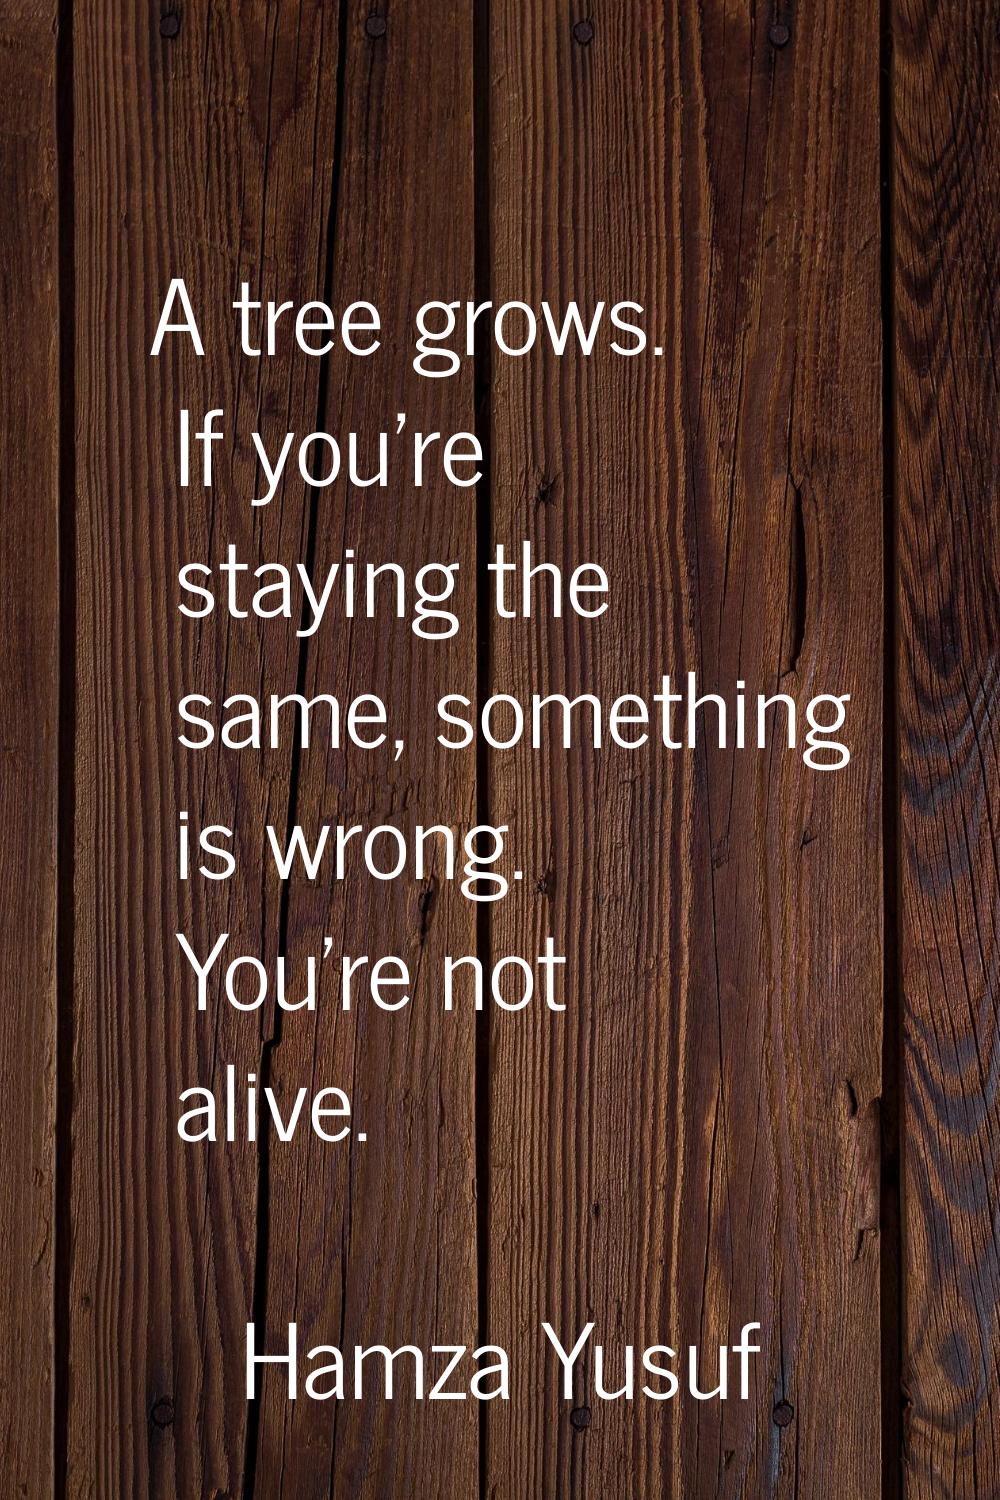 A tree grows. If you're staying the same, something is wrong. You're not alive.